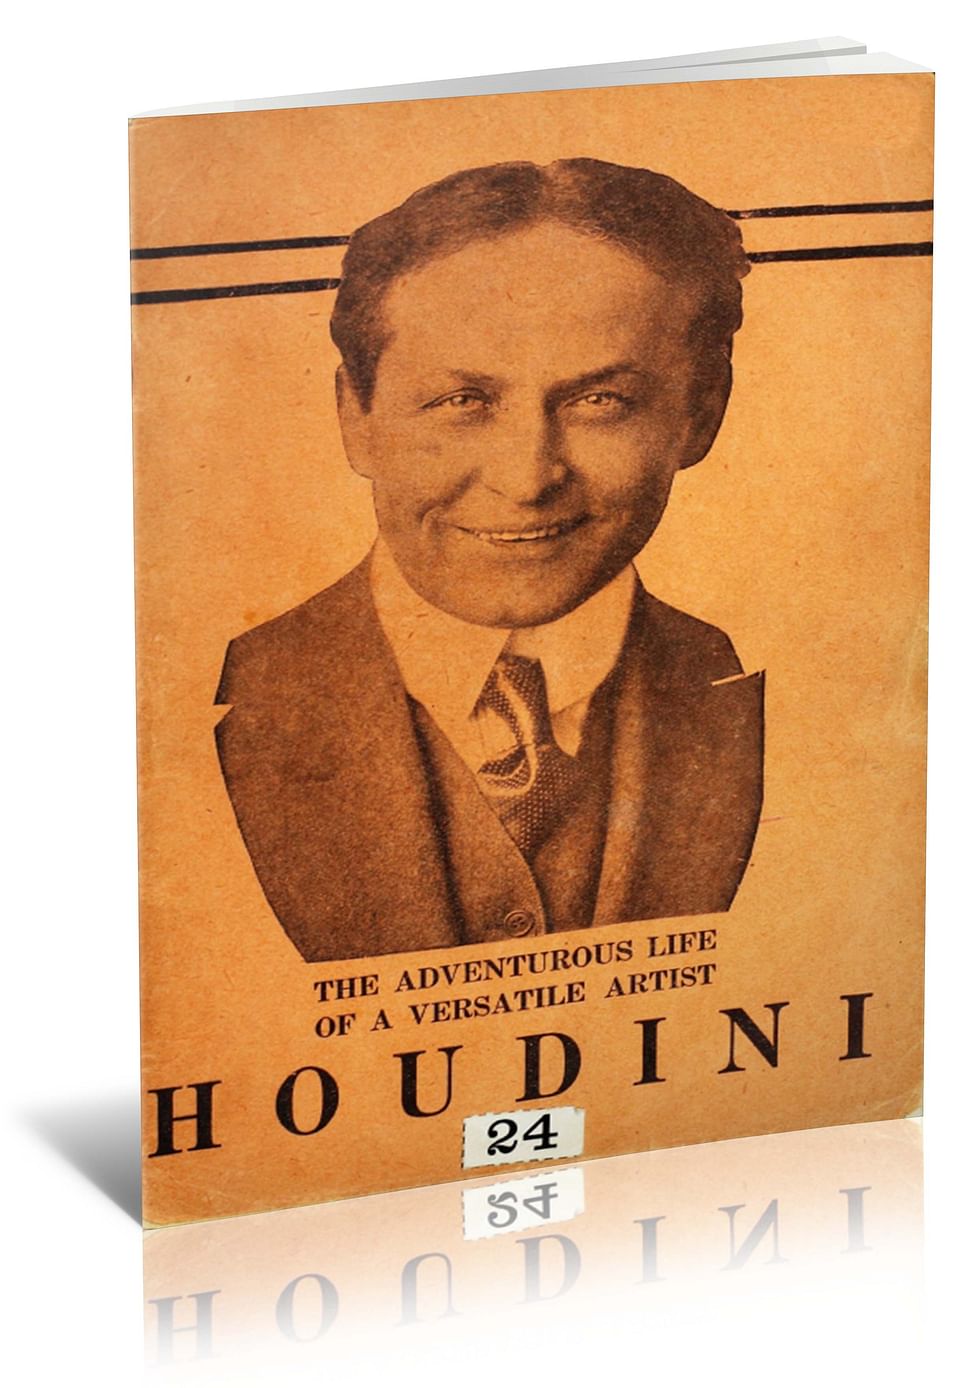 Who Was Harry Houdini? PDF Free Download